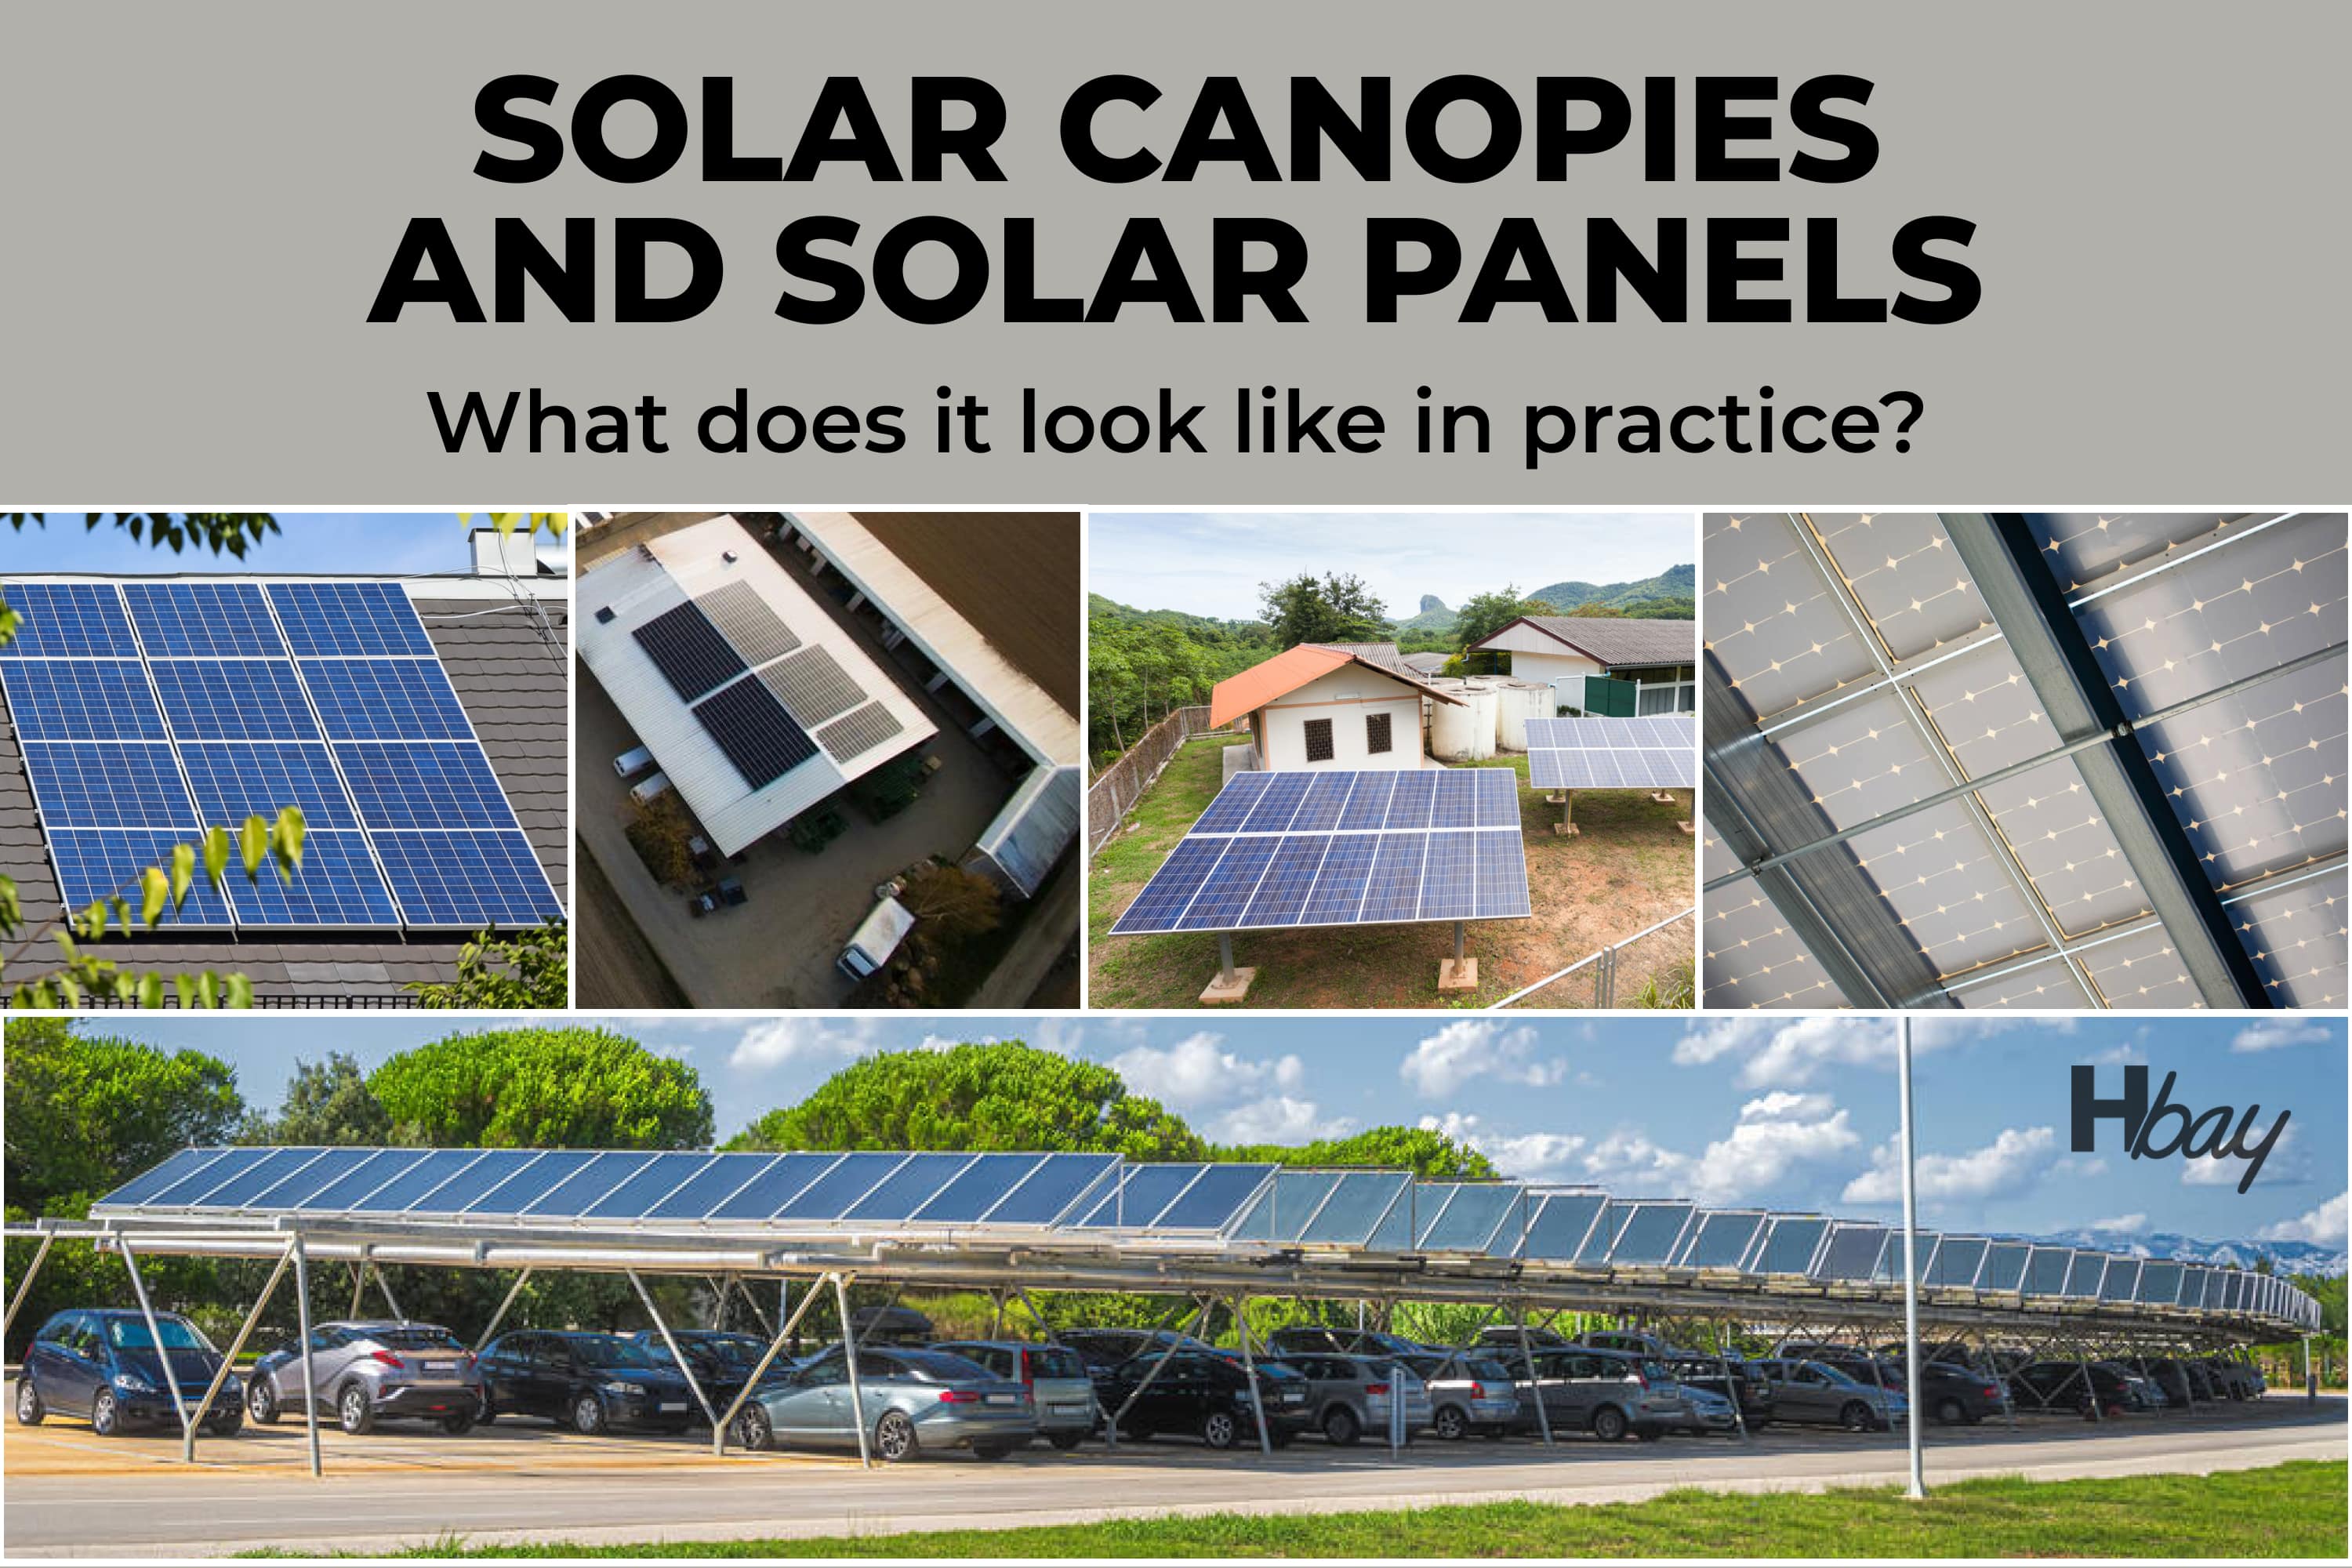 Solar canopies and solar panels